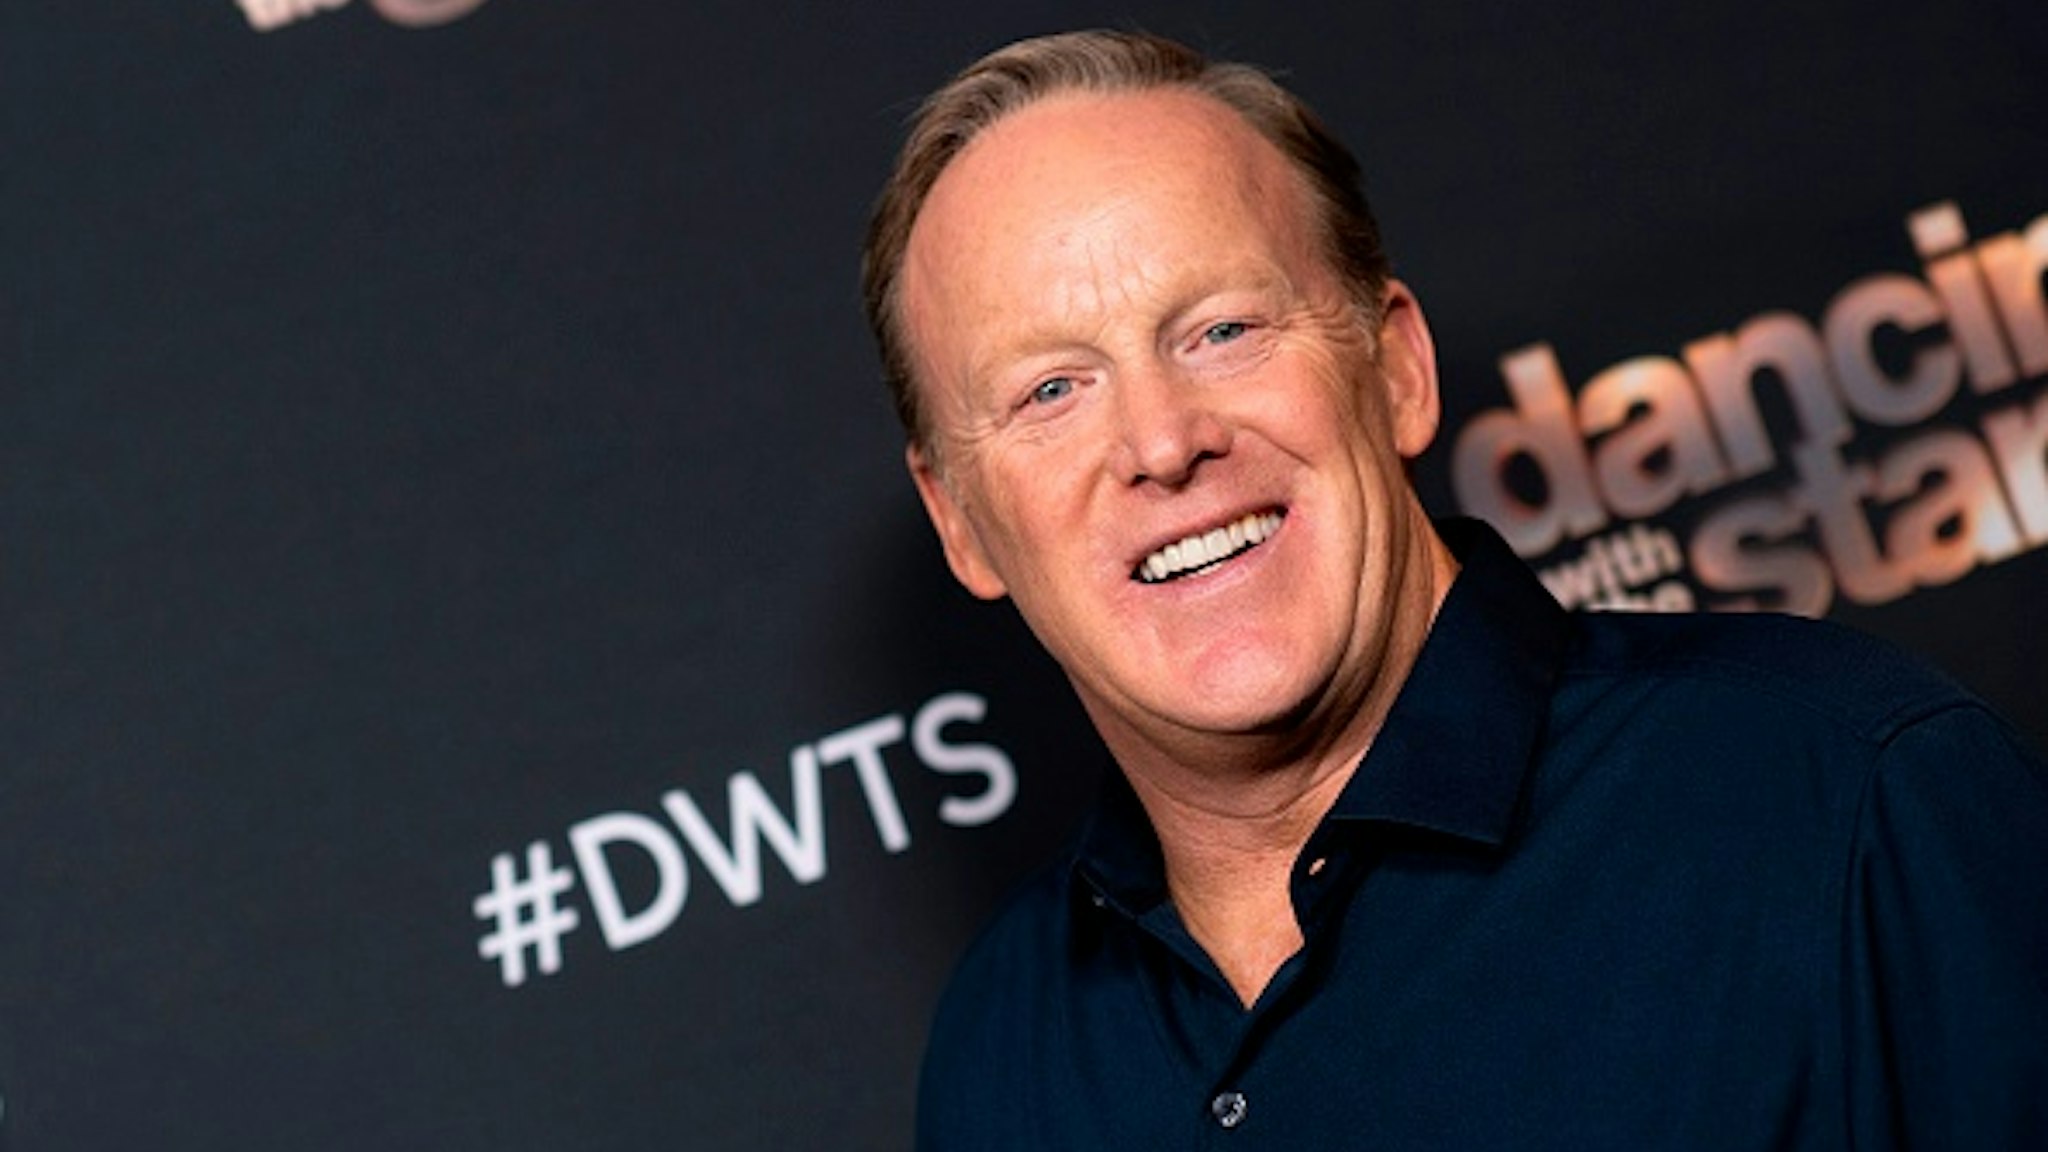 Former White House press secretary Sean Spicer attends the Dancing With The Stars - 2019 top 6 finalist event, November 4, 2019, in Los Angeles.